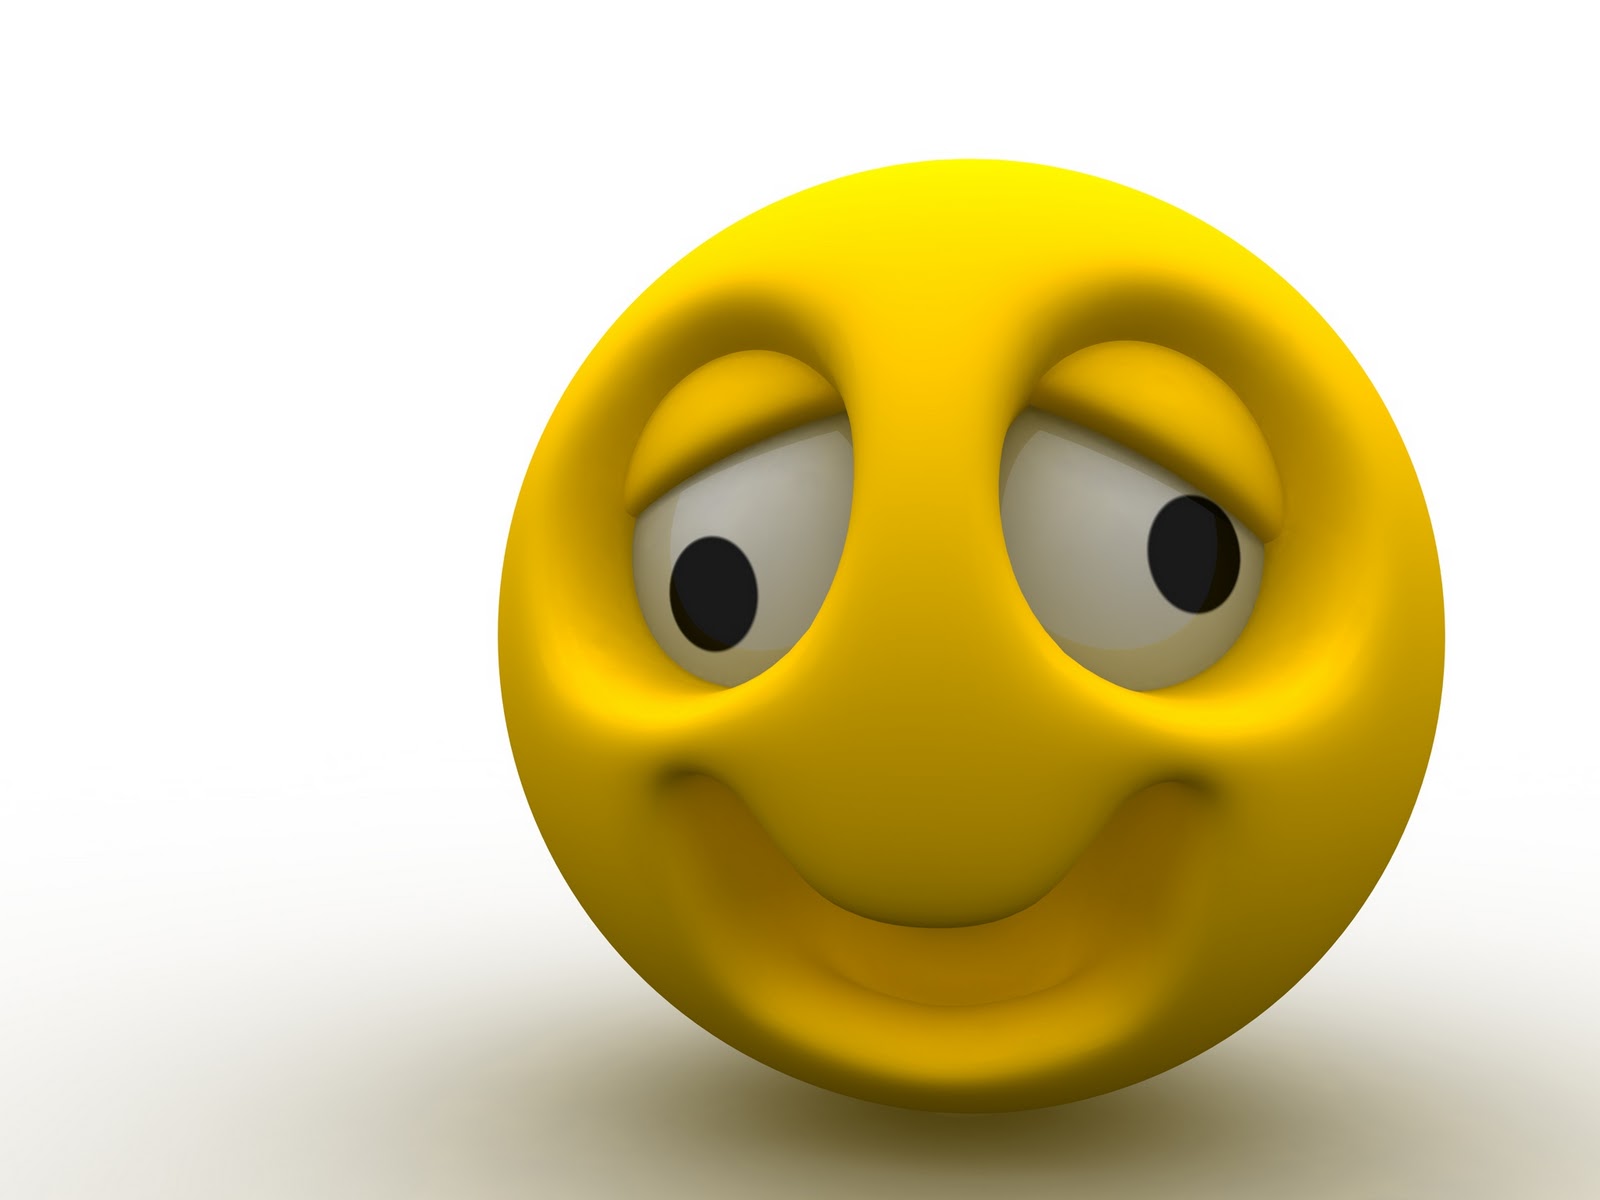 WallpaperfreekS HD Smile Emoticons Wallpapers